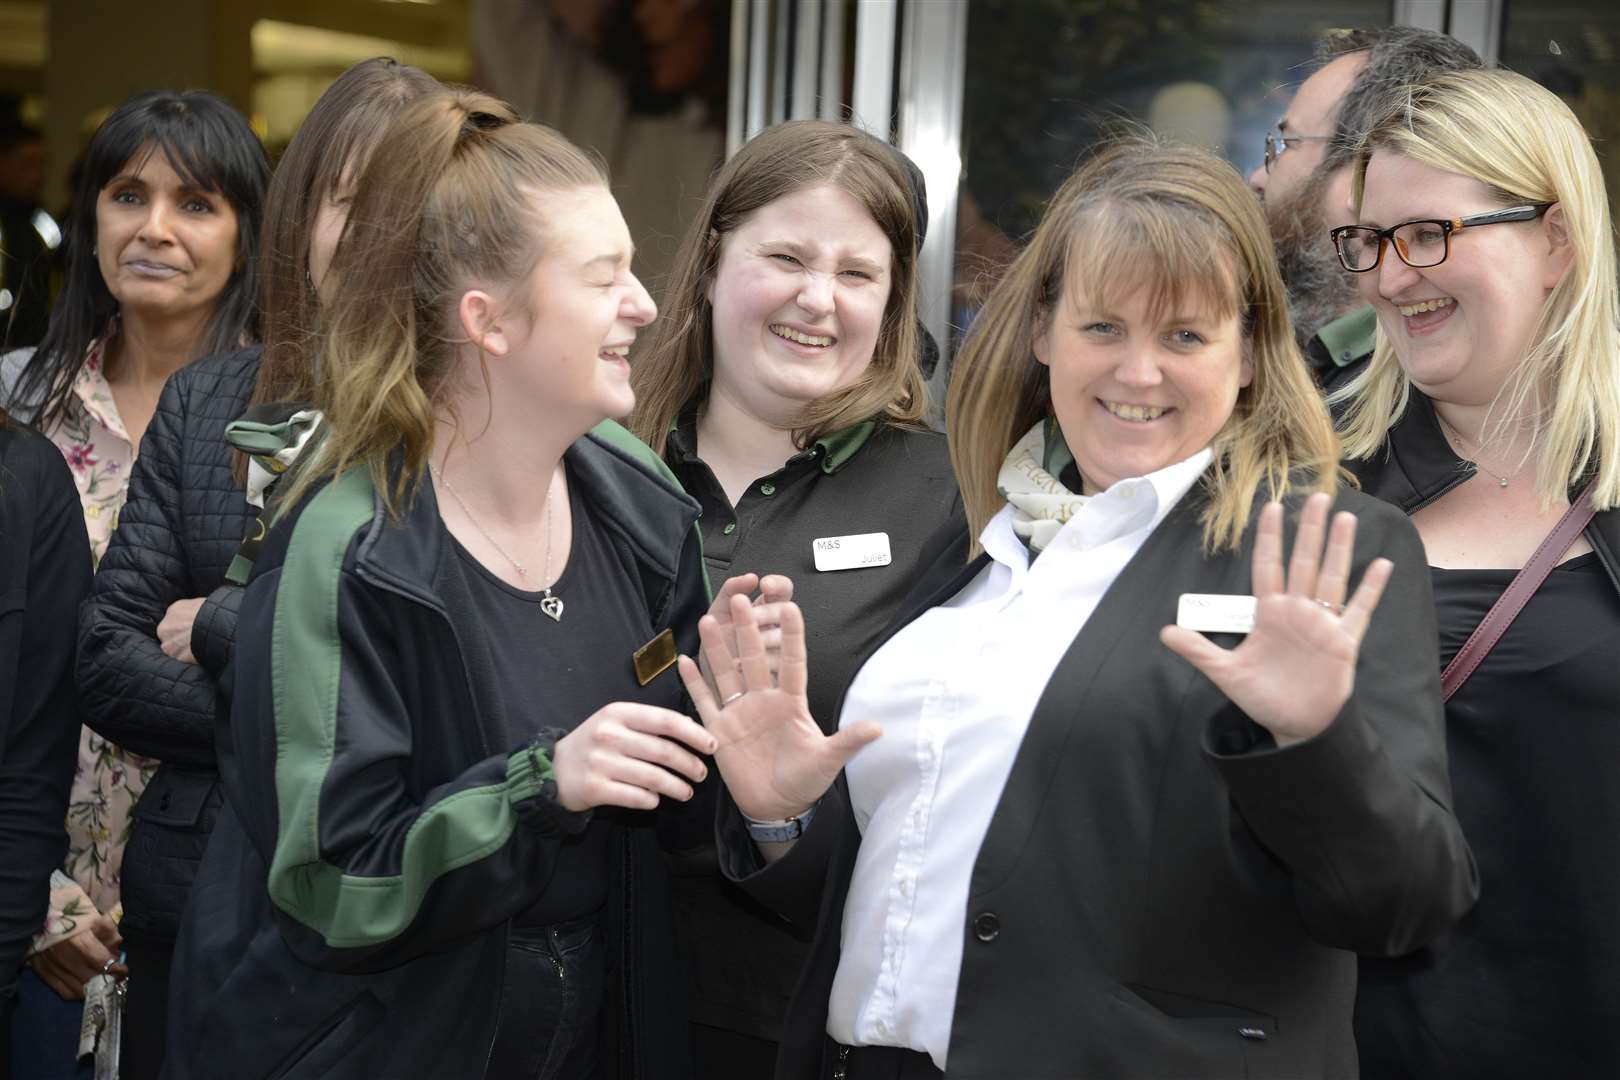 Saying goodbye. Last minute for staff at M&S ​​County Square. Photo: Paul Amos.